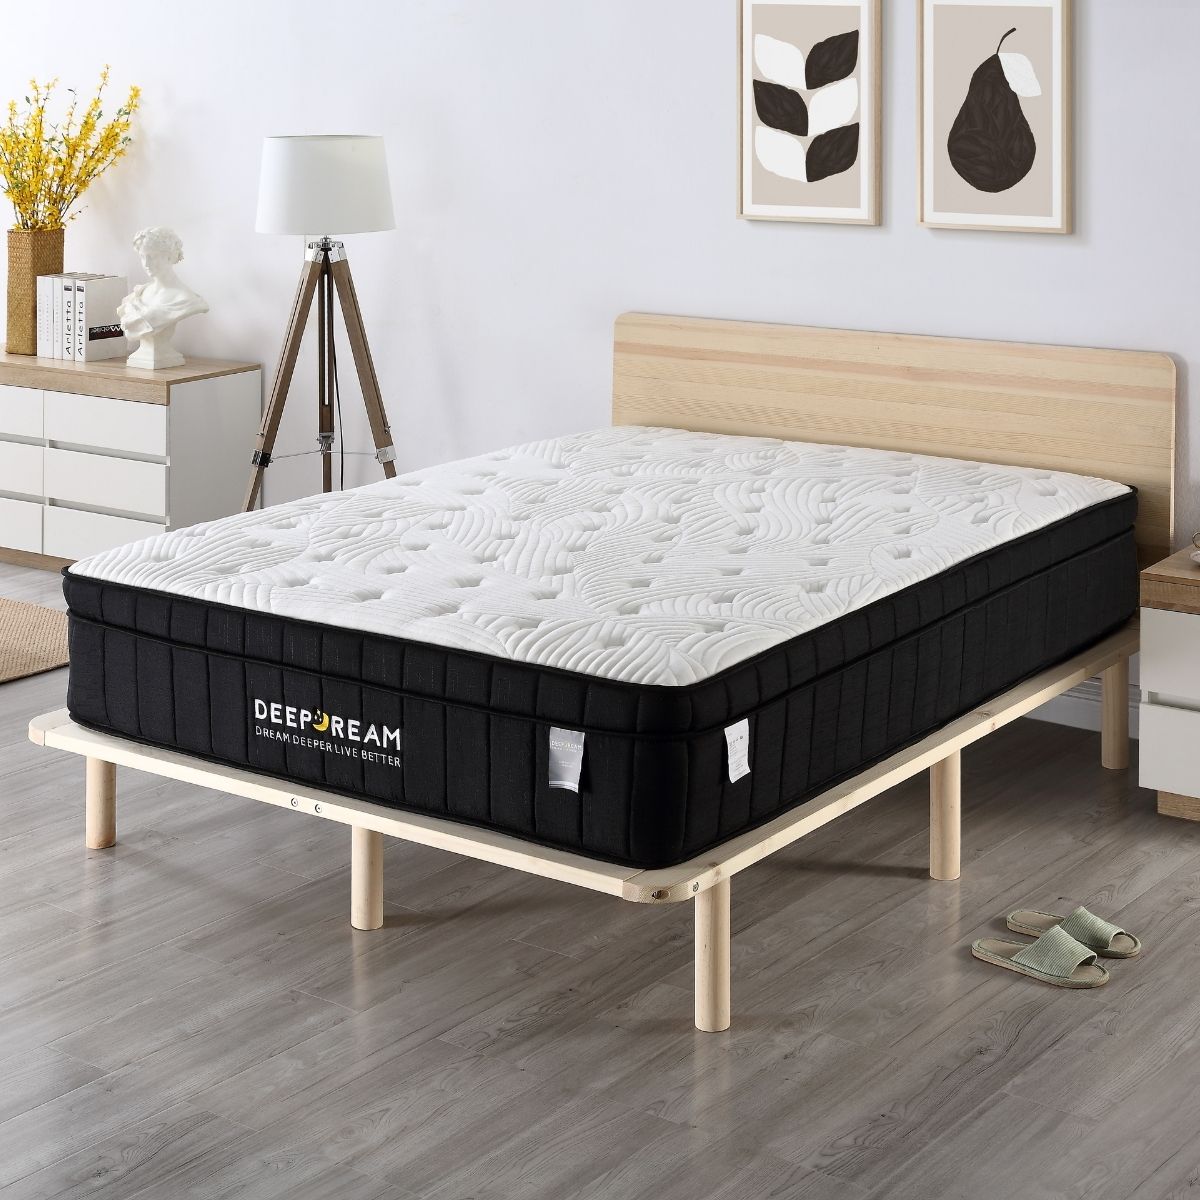 Back In Stock! King Single Size Super Firm Charcoal Infused Pocket Mattress